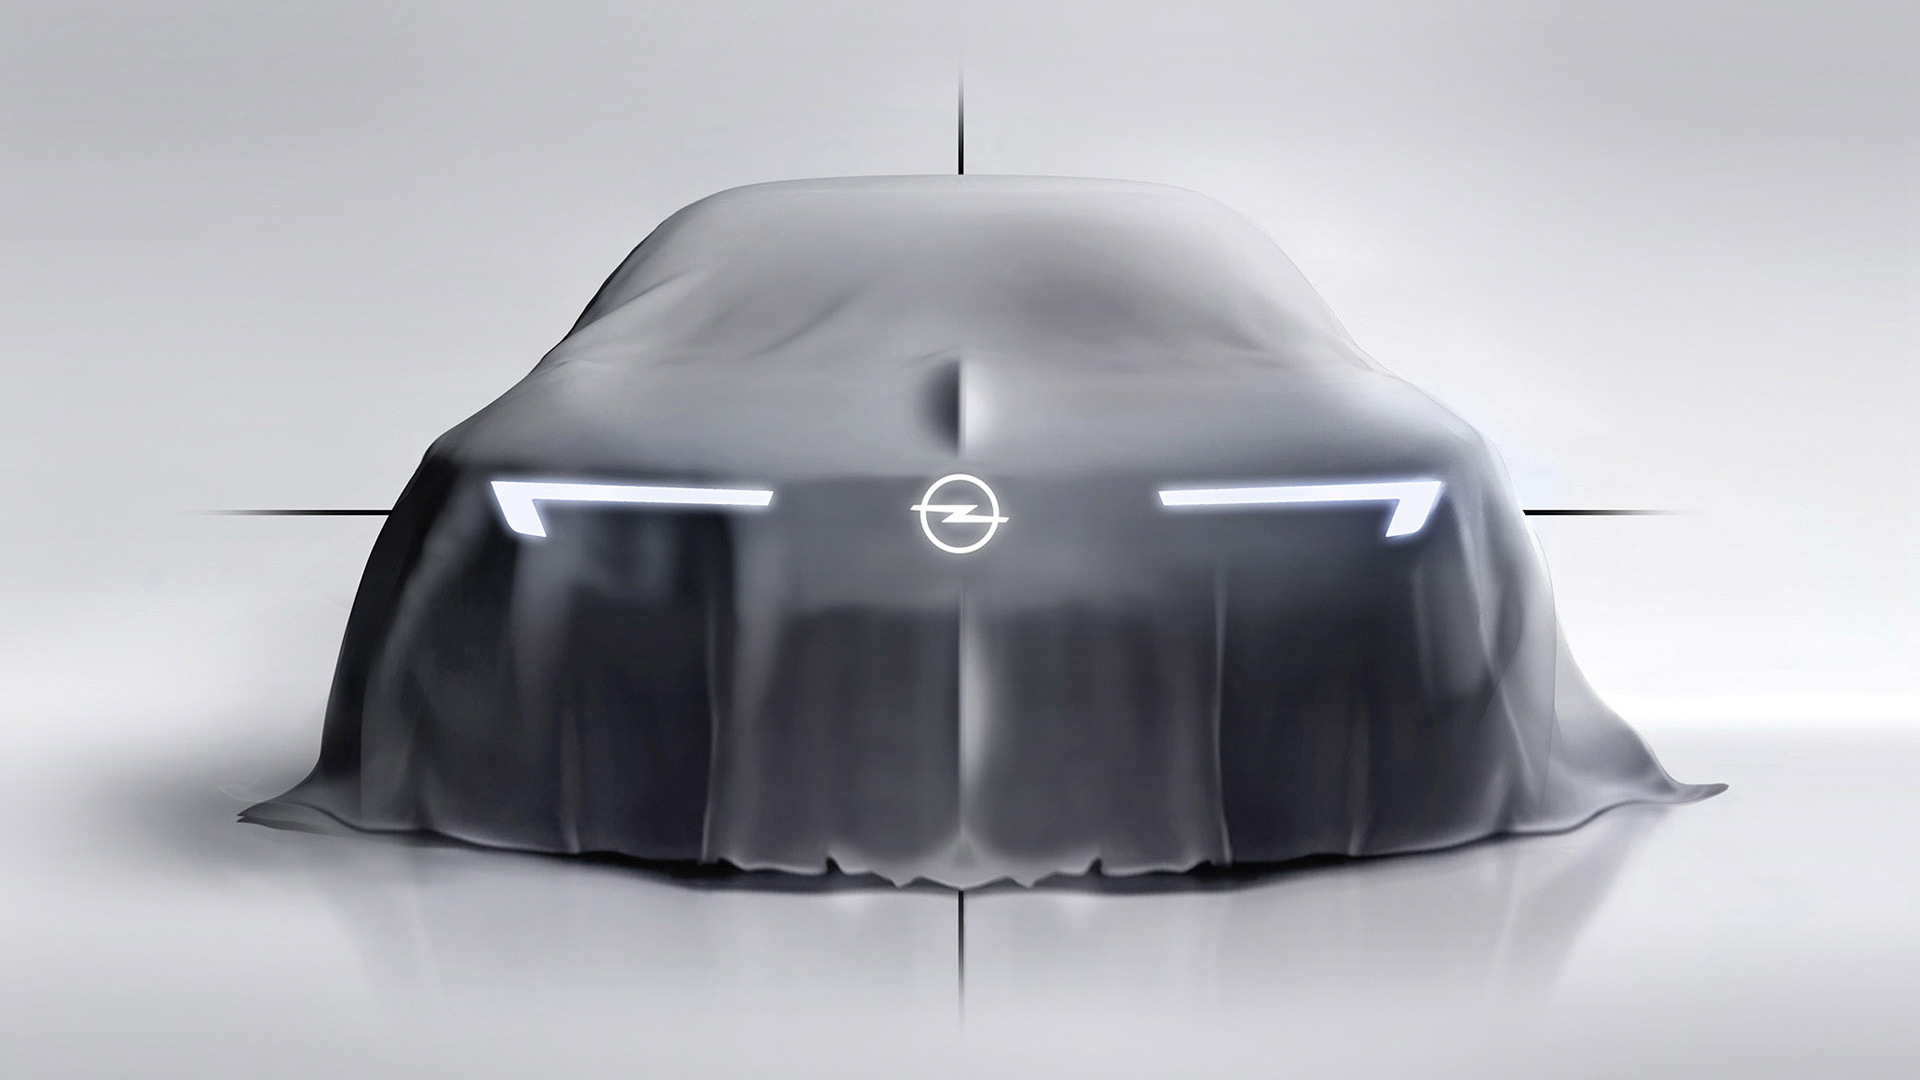 Teaser for Opel concept introducing “bold and pure” design language